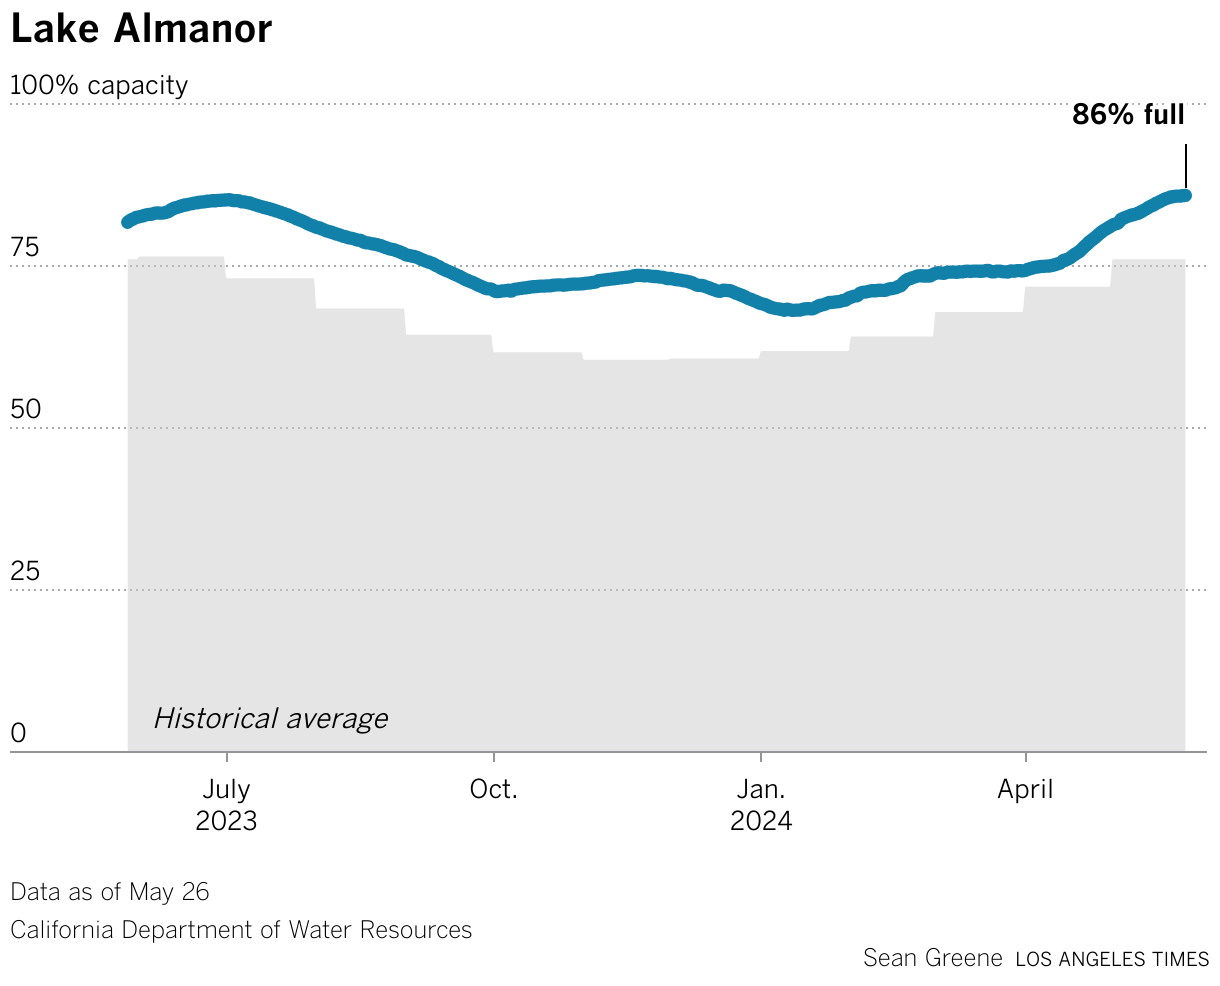 Lake Almanor's storage capacity is 107% of average for this month.